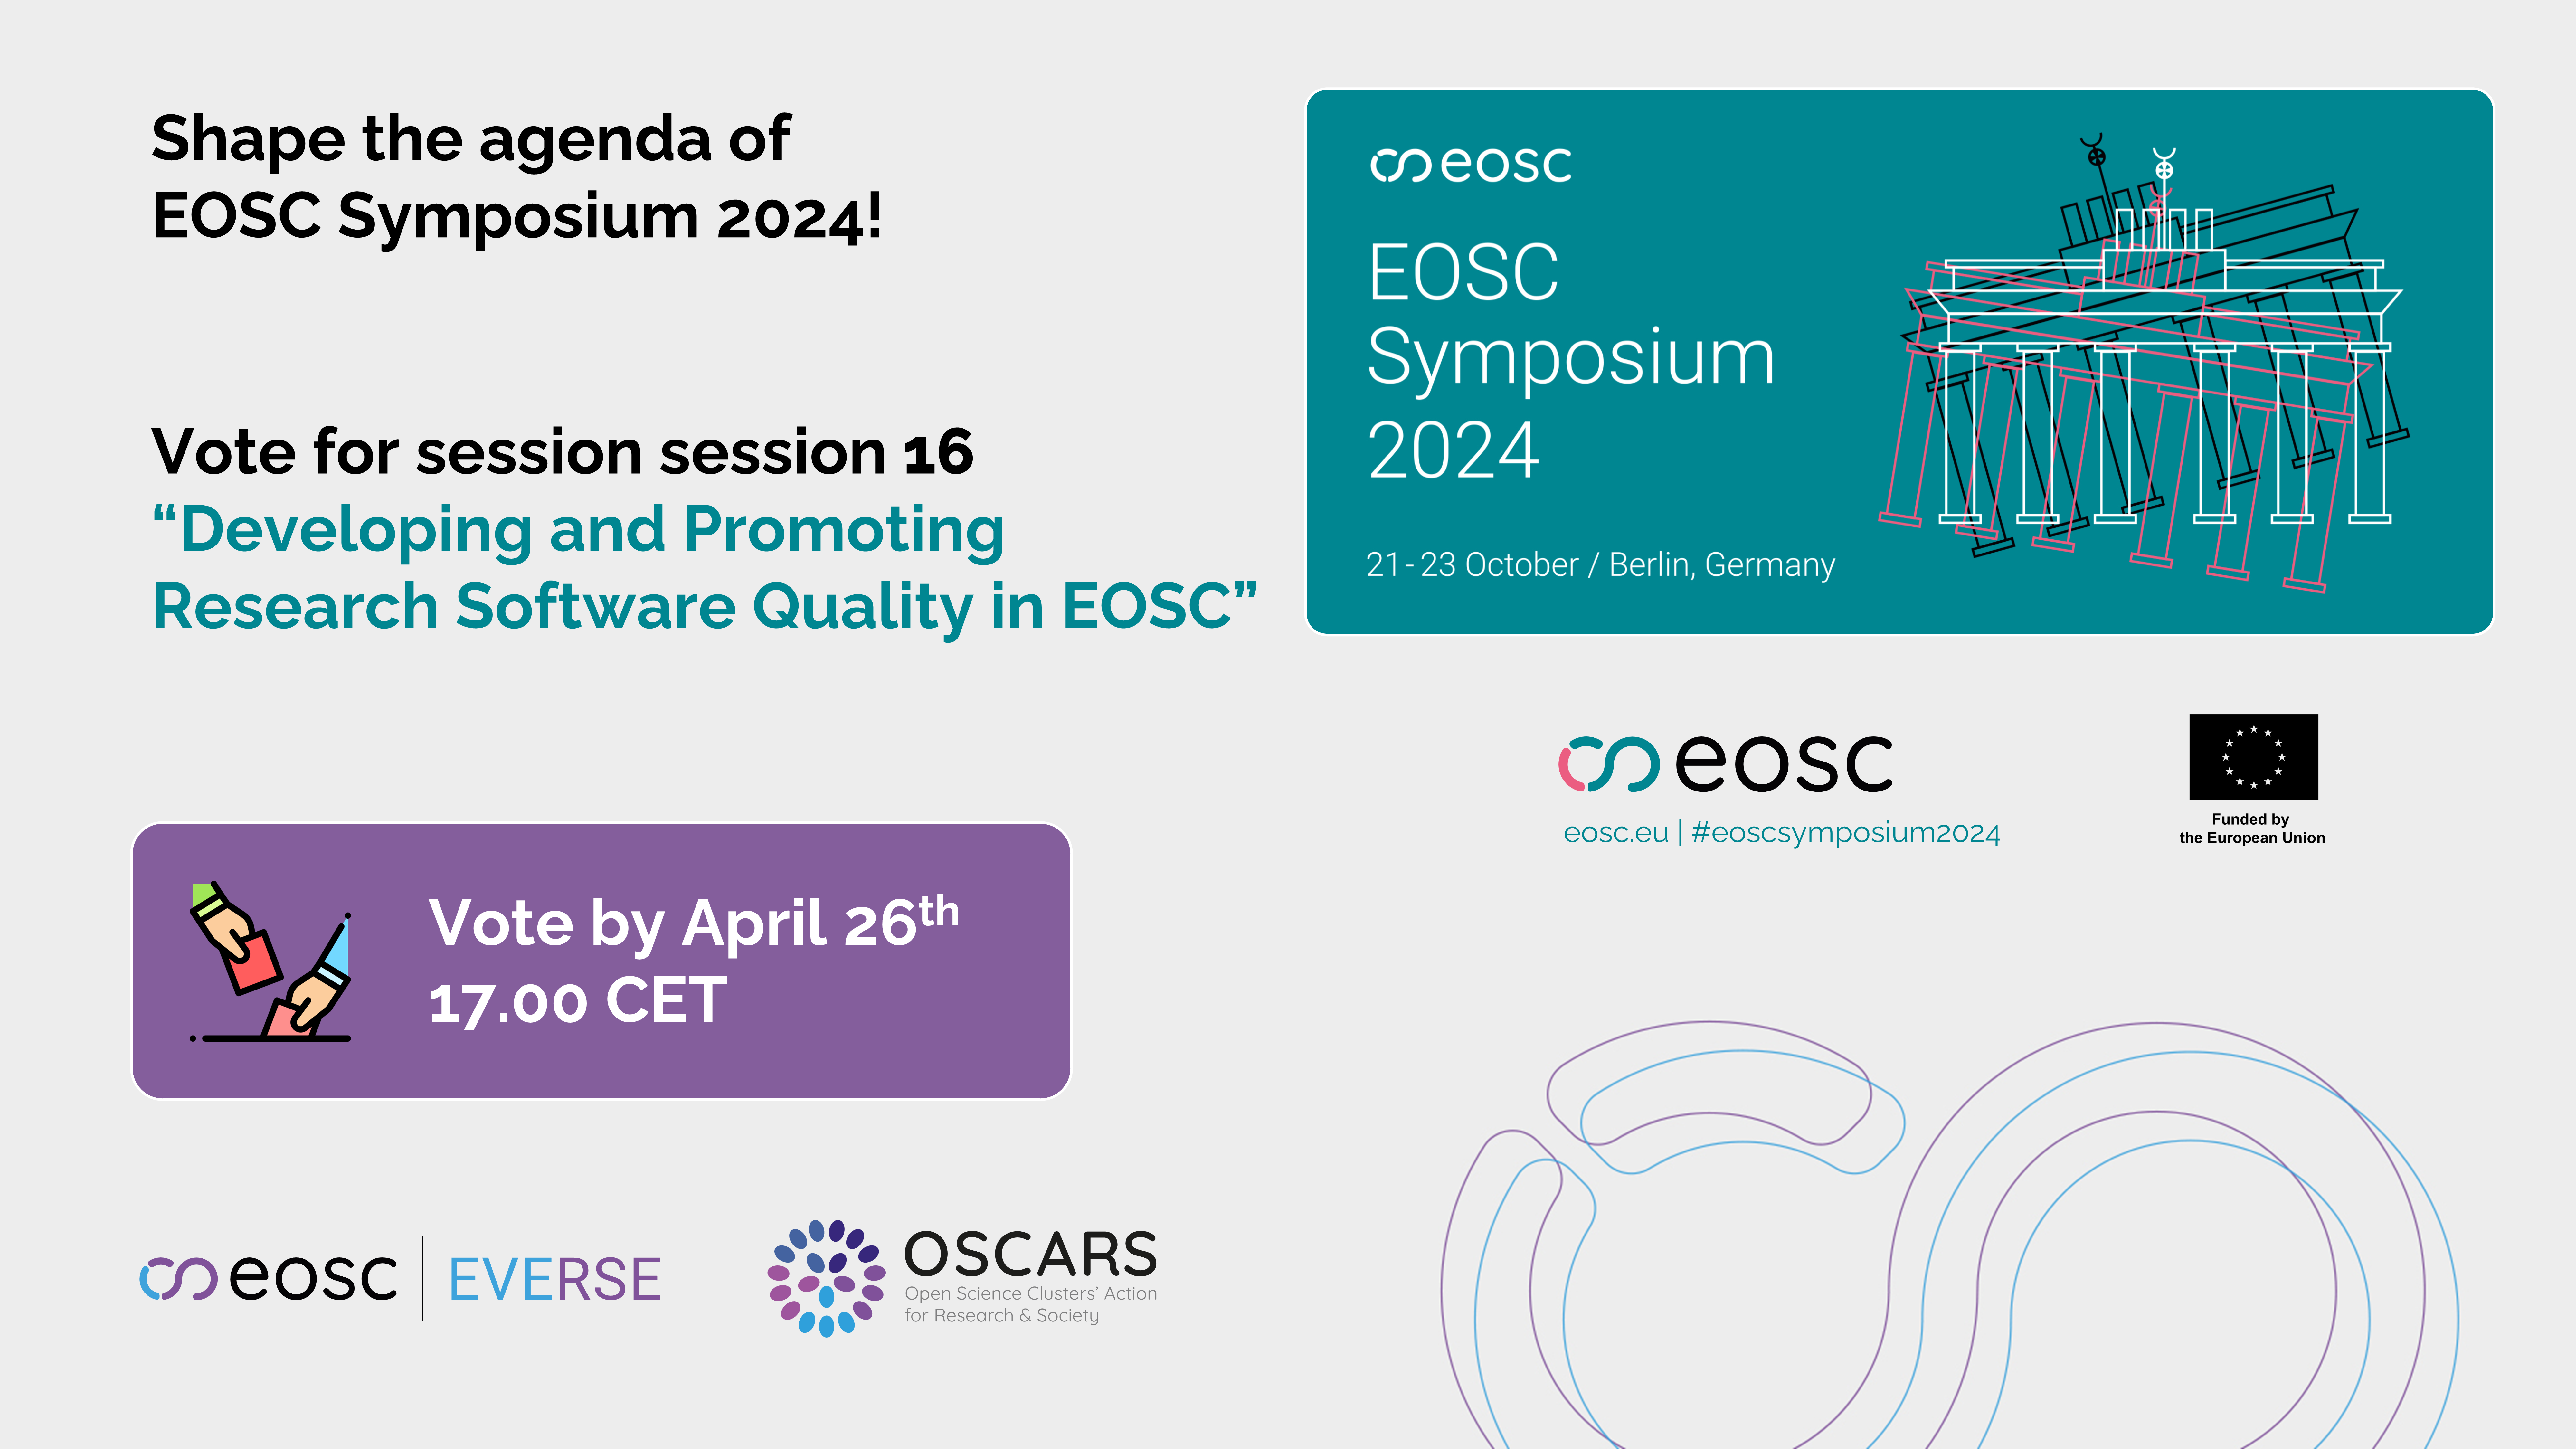 EVERSE session, Developing and Promoting Research Software Quality in EOSC, at EOSC Symposium 2024